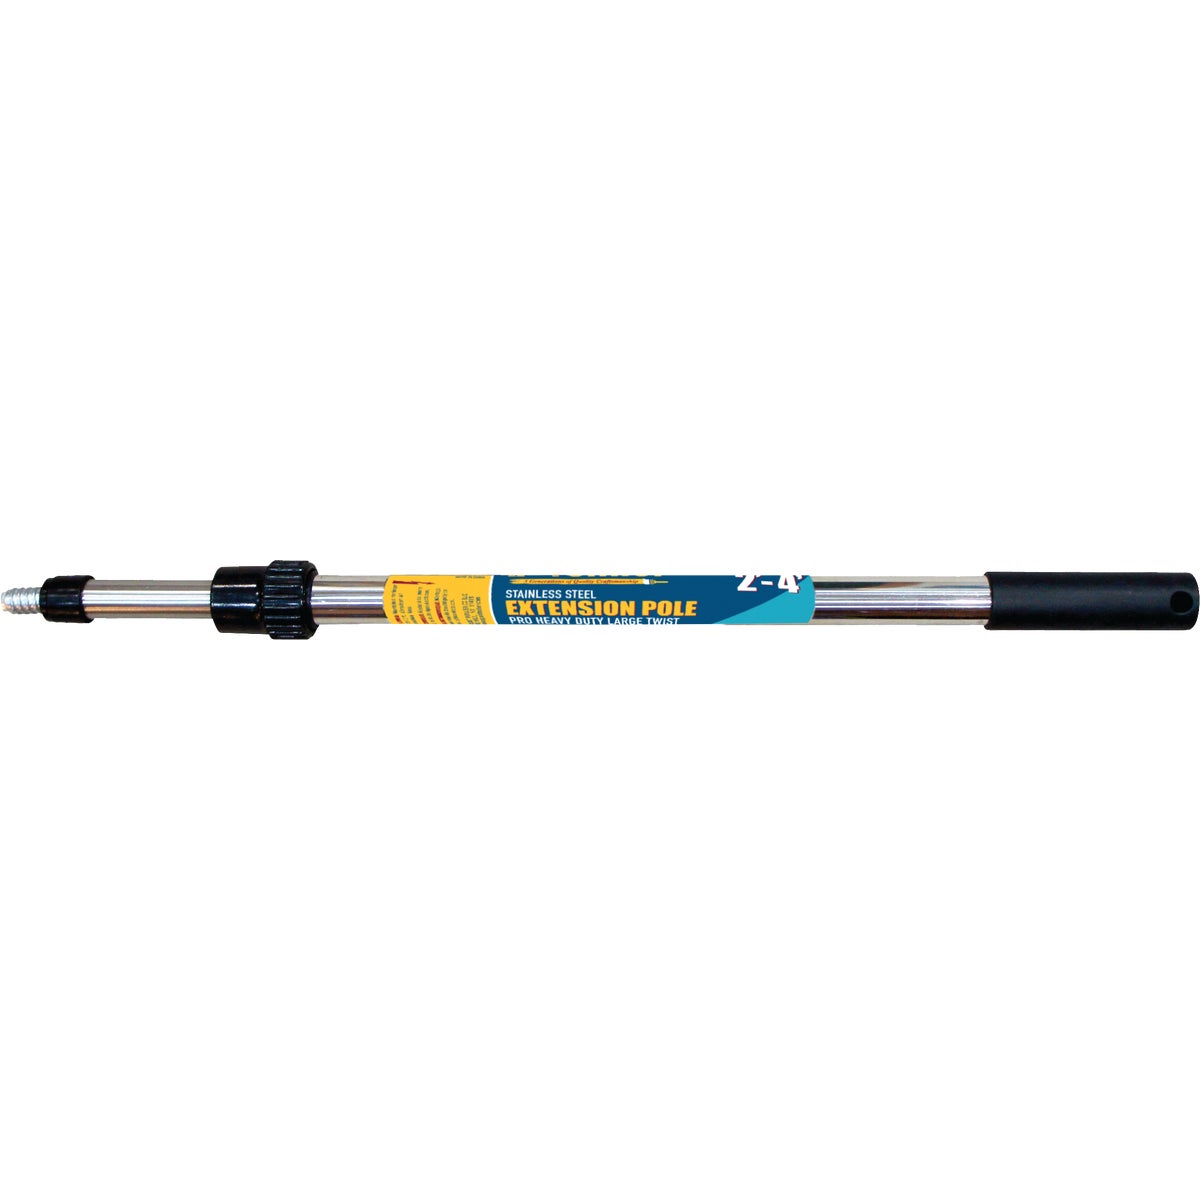 Premier 2 Ft. To 4 Ft. Telescoping Stainless Steel External Twist Extension Pole